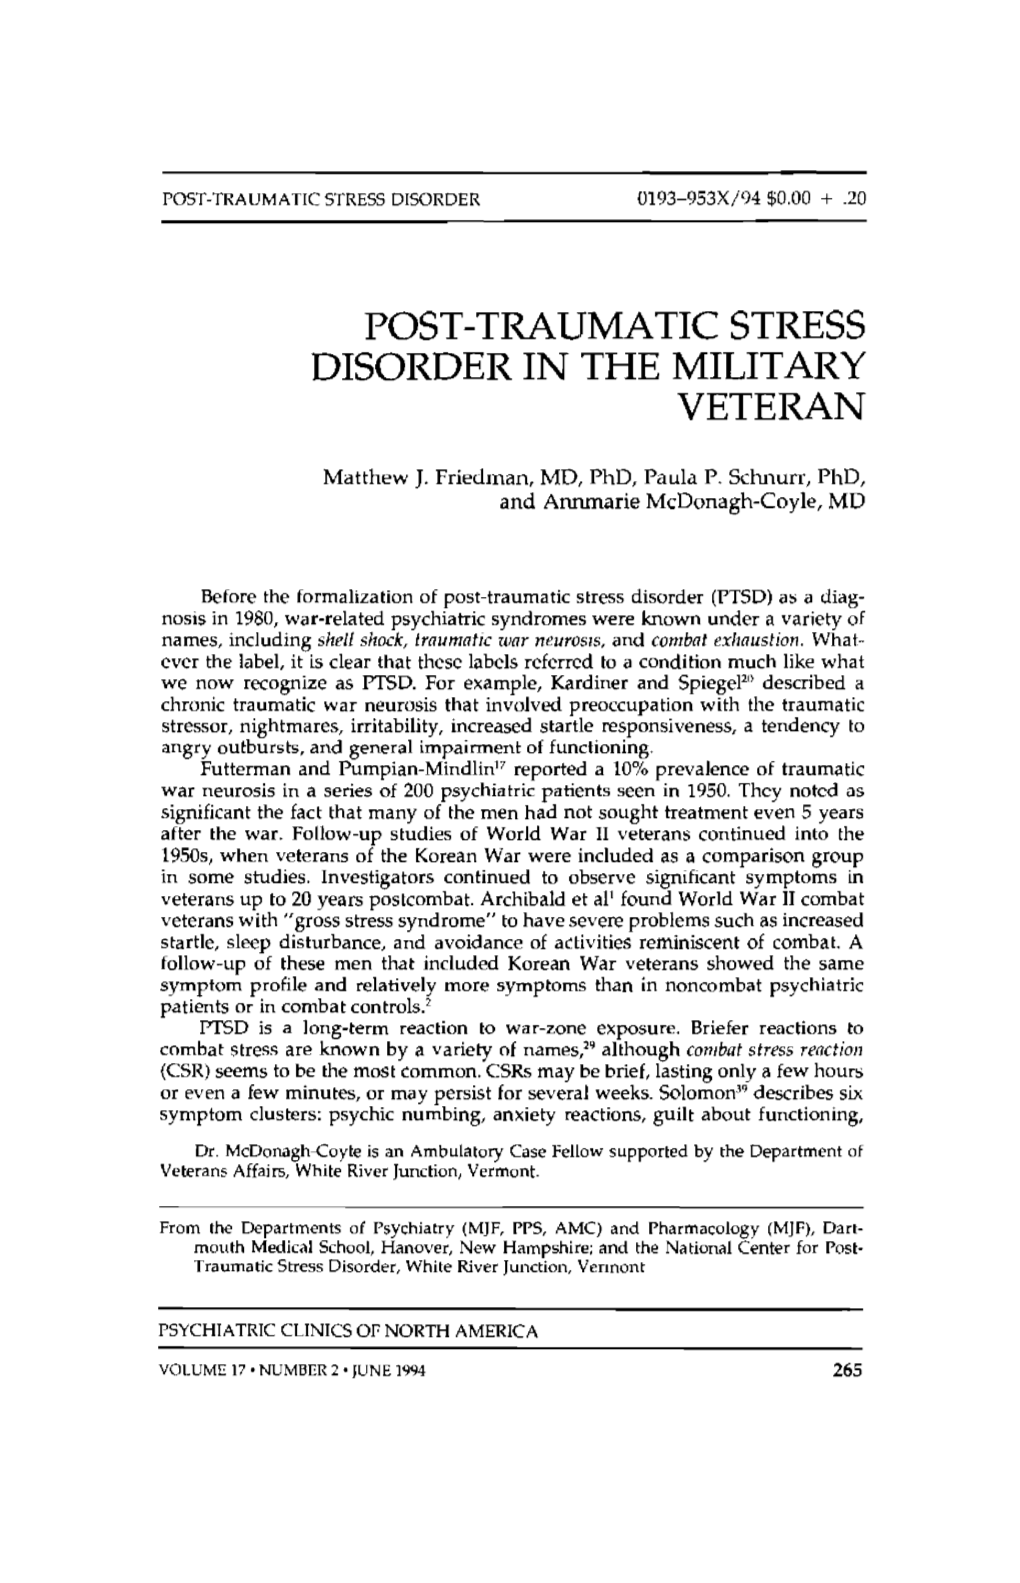 Post-Traumatic Stress Disorder in the Military Veteran